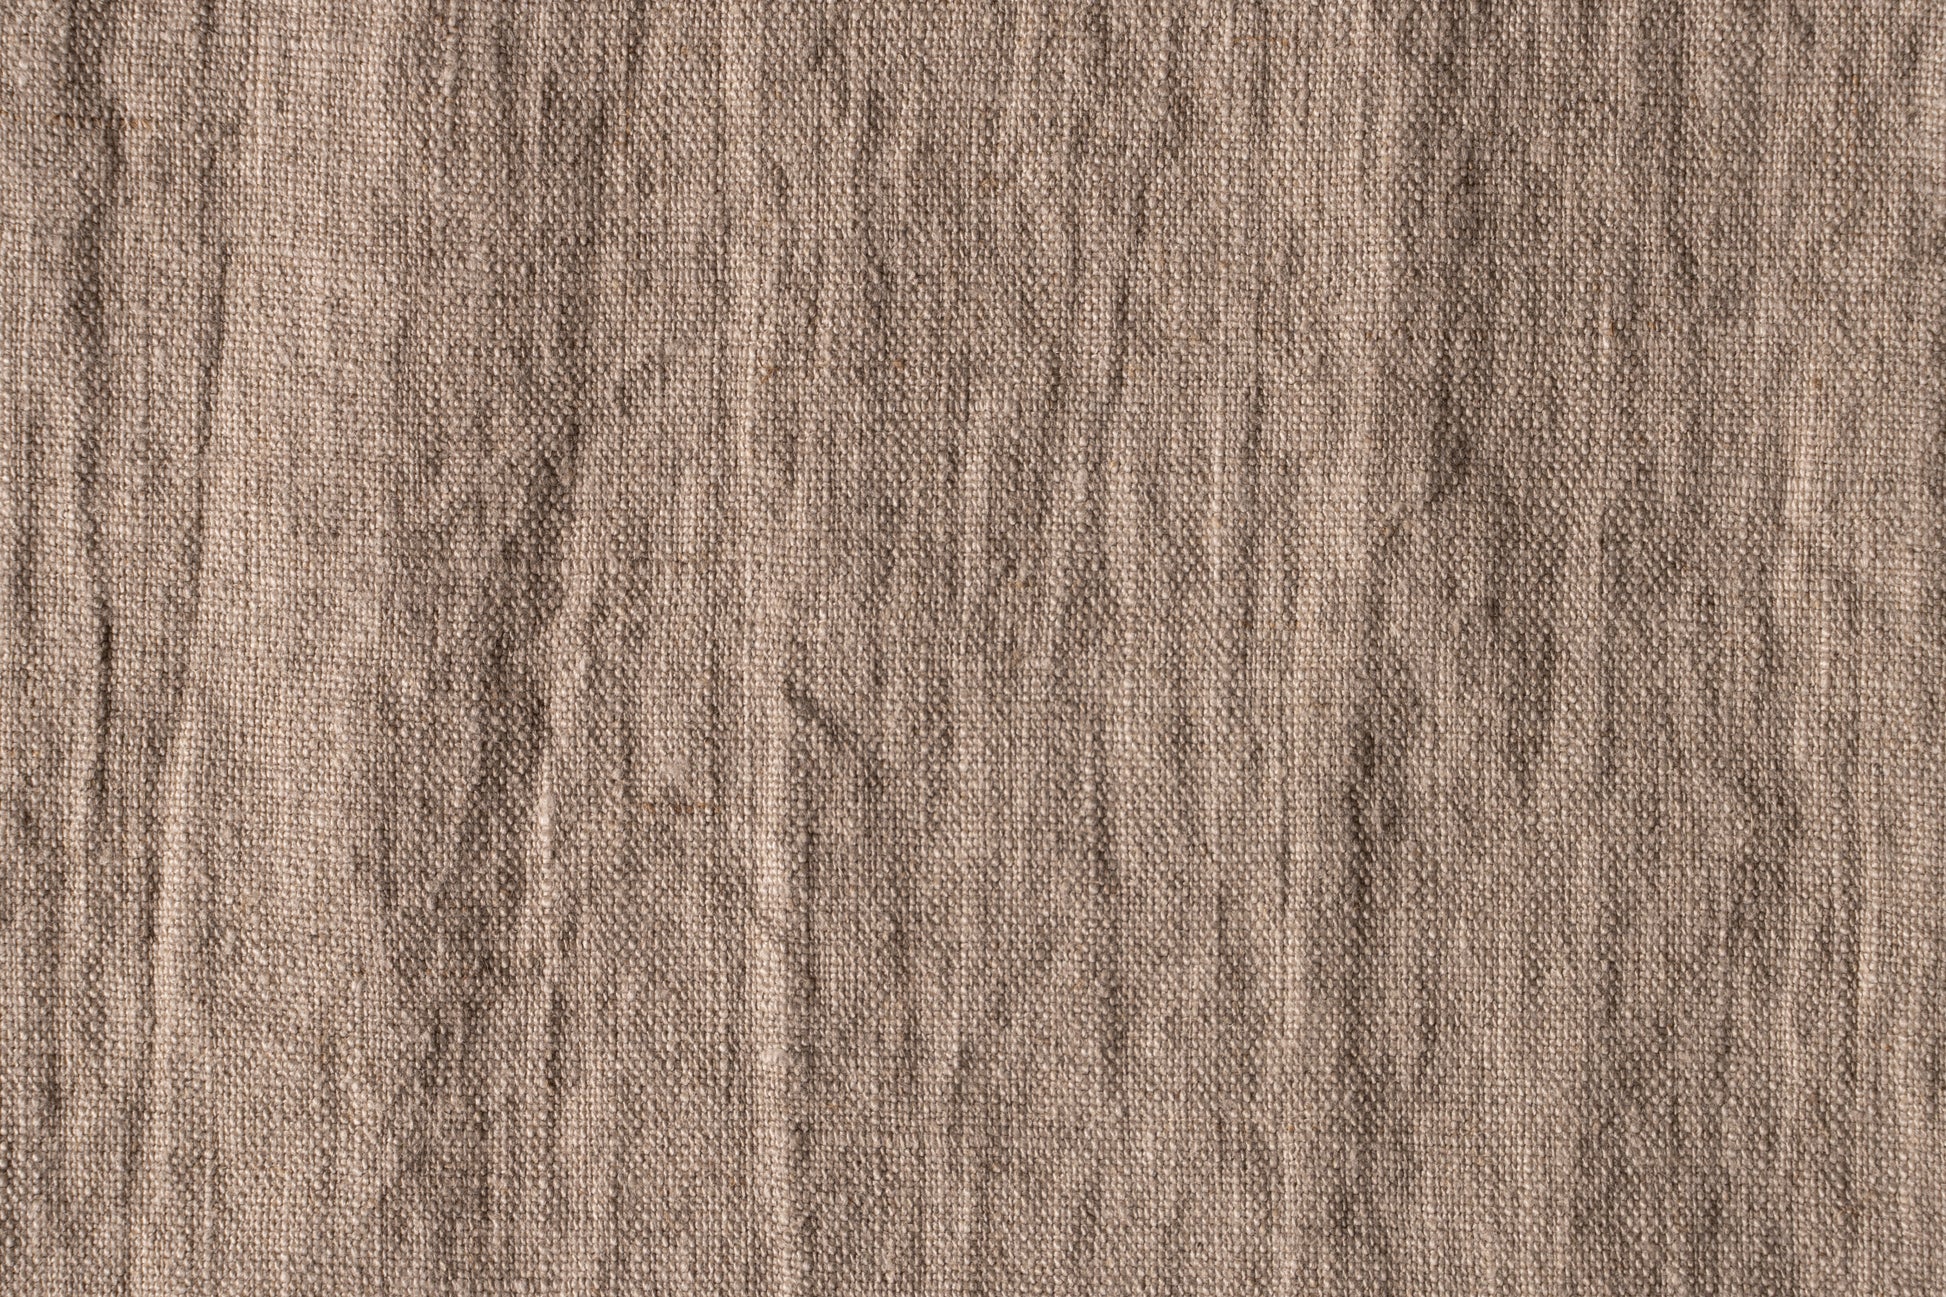 Natural Linen Fabric / 100% Soft Washed Flax by Yard or Meter for Dress /  Undyed Flax Gray Pure Softened Linen / Stonewashed Organic Fabric -   Canada